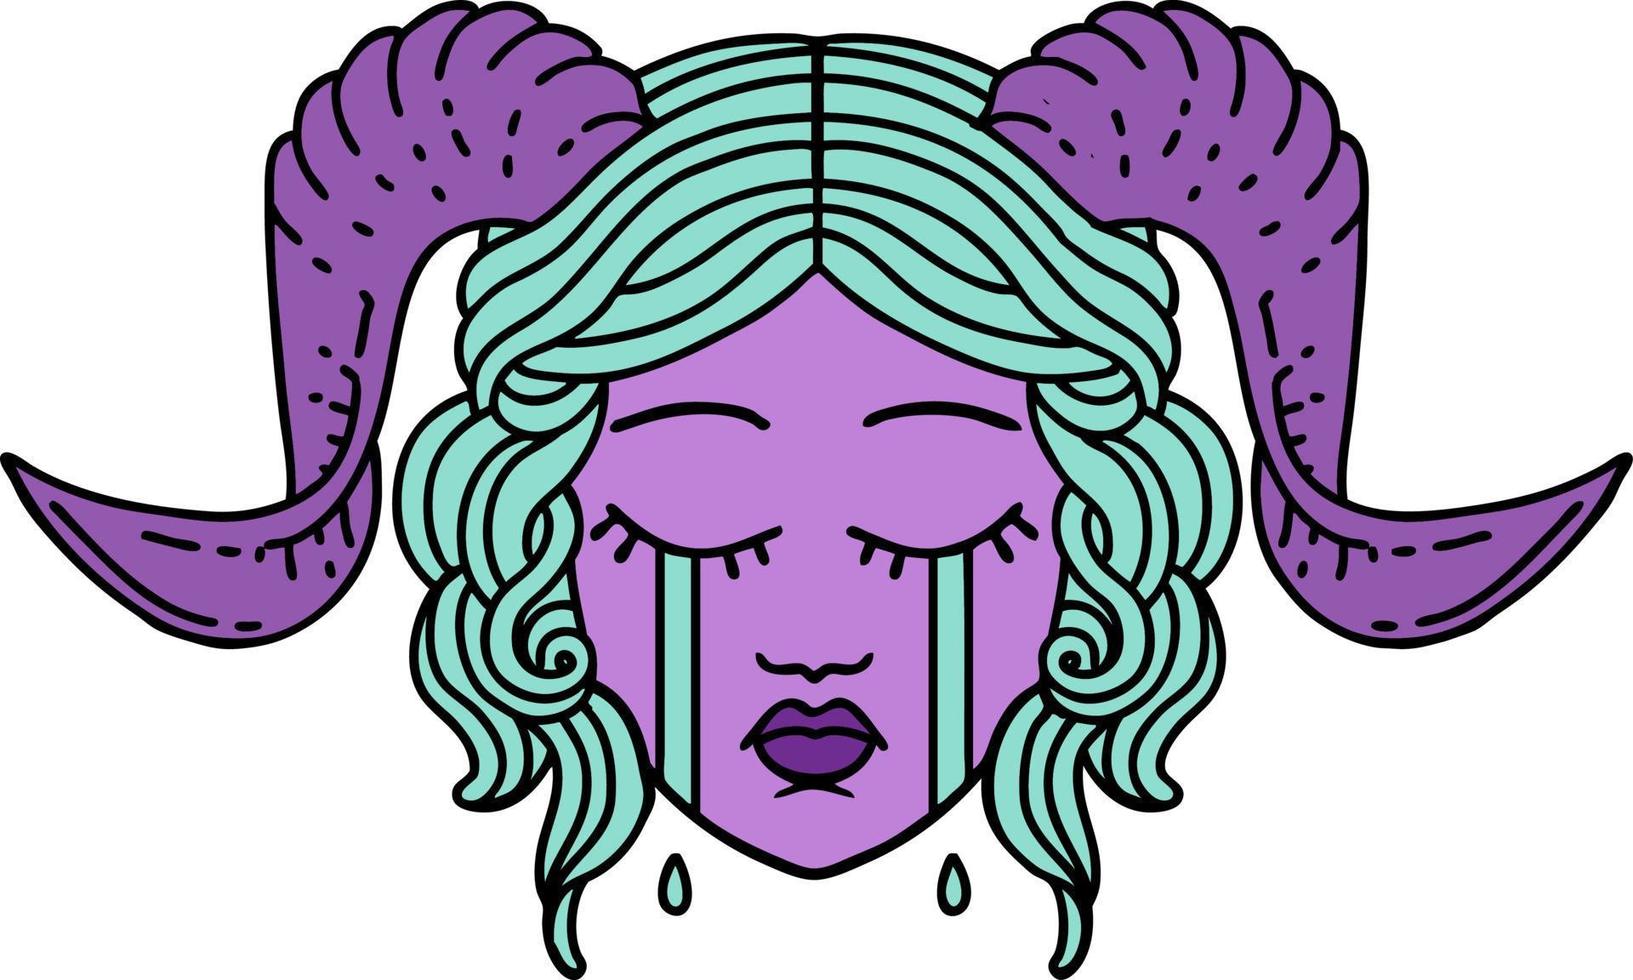 Retro Tattoo Style crying tiefling character face vector